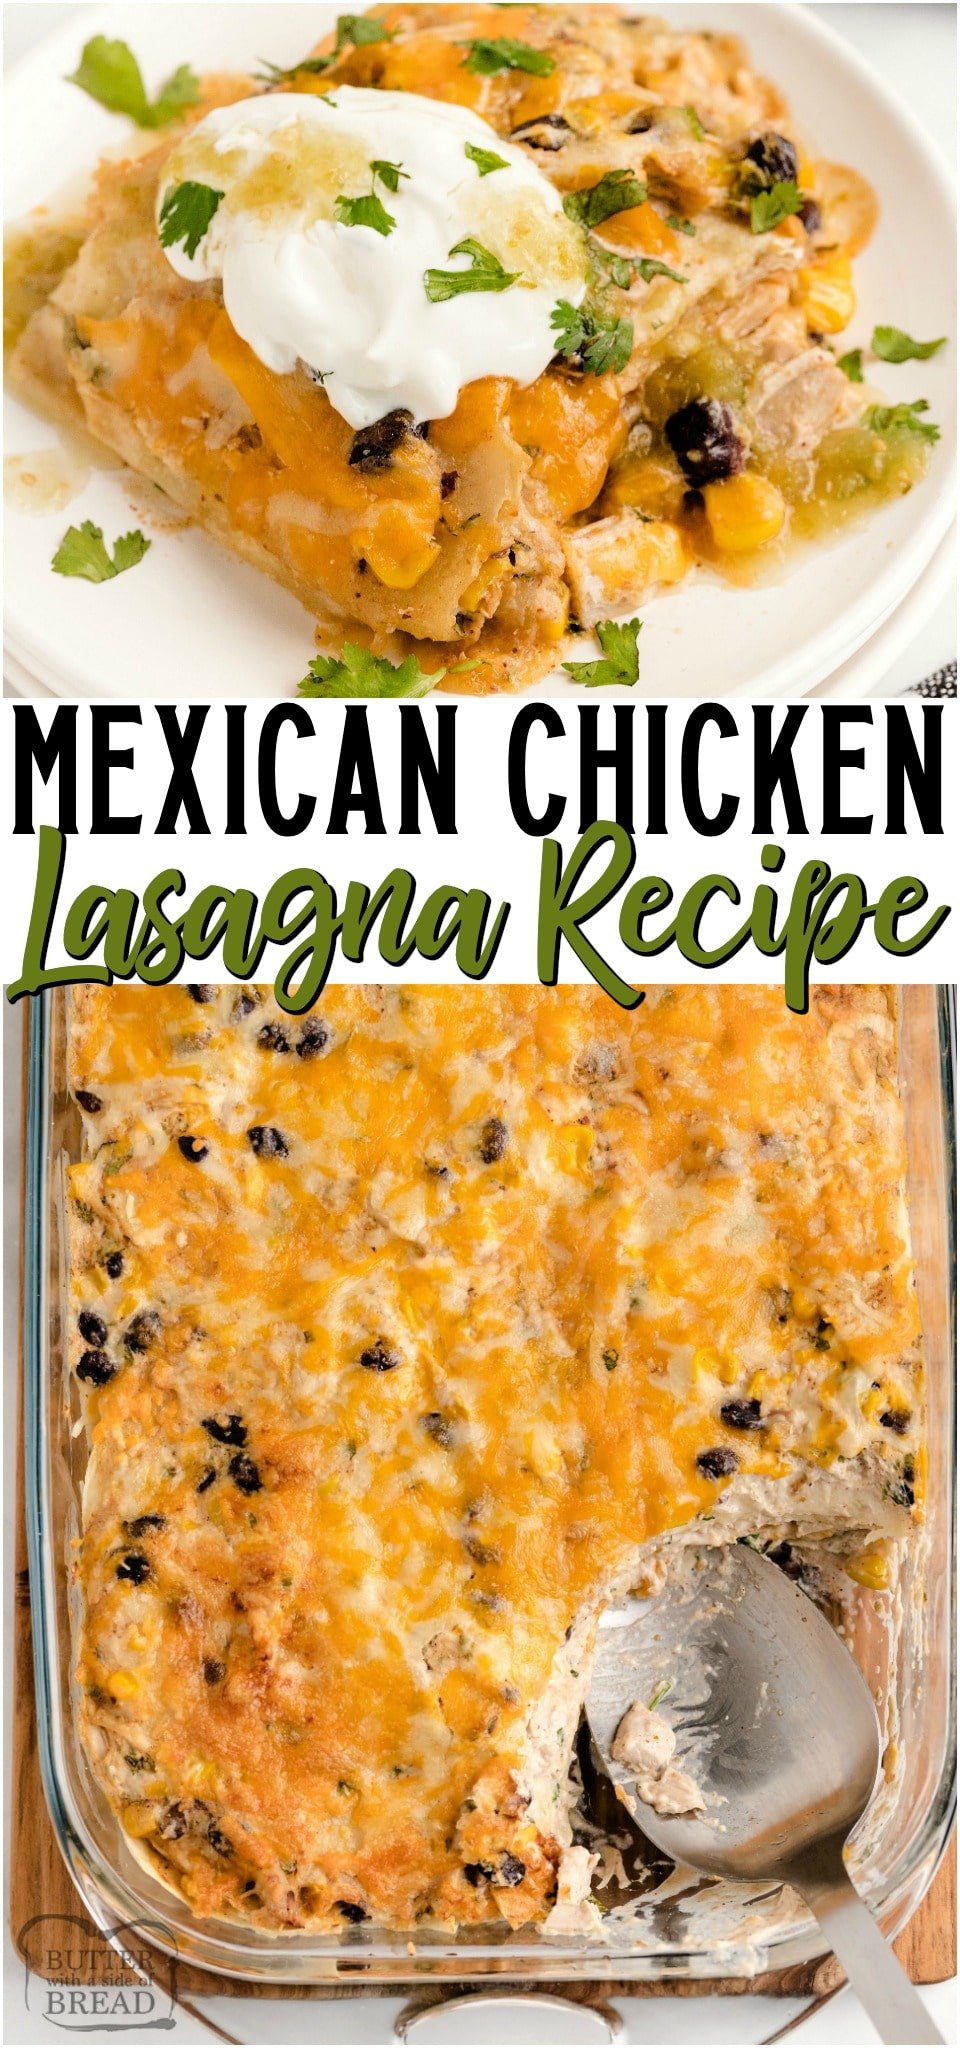 Mexican Chicken Lasagna is an easy chicken dinner recipe made by layering tortilla strips with sour cream, black beans, salsa, corn, seasonings and cheese of course! Easy chicken lasagna recipe with fabulous Mexican flavors our family loves. 